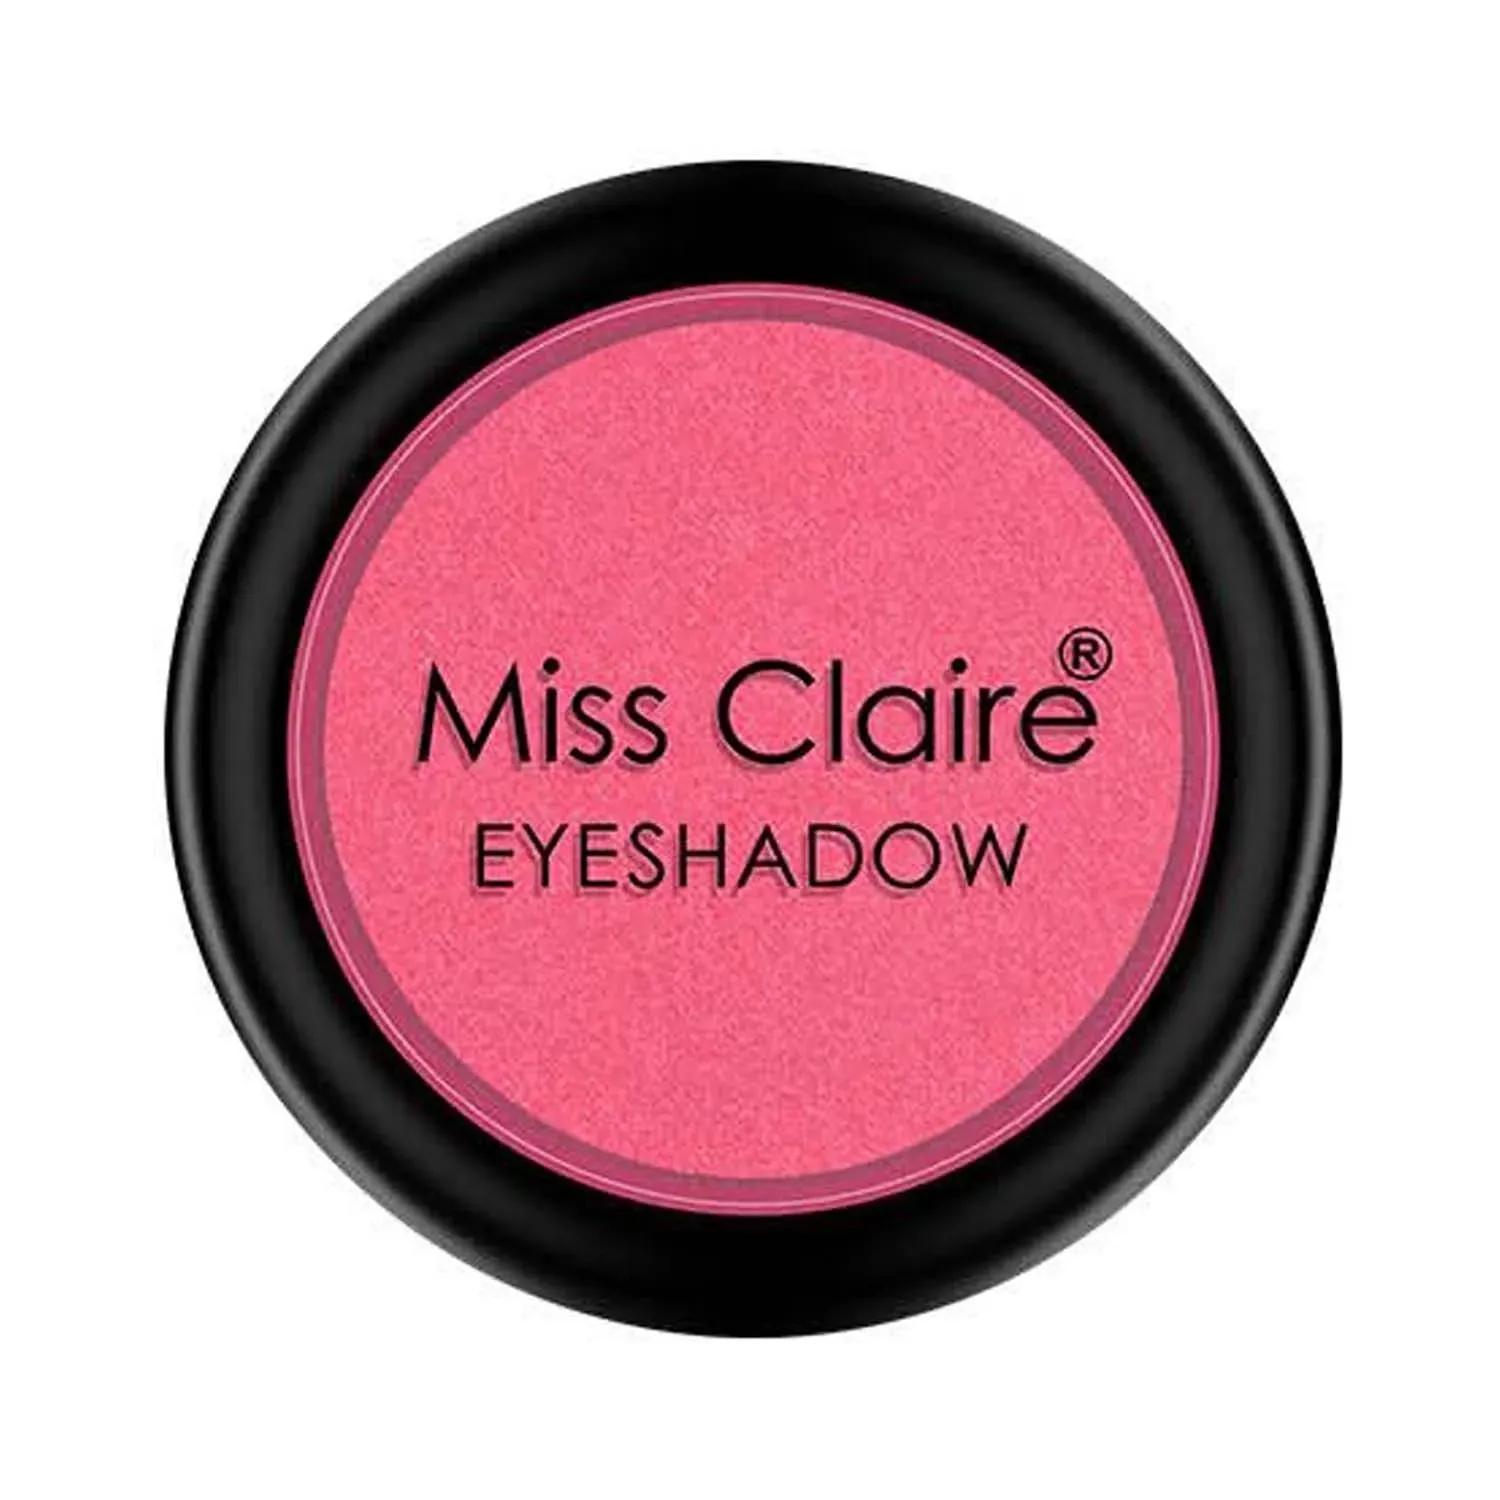 Miss Claire Single Eyeshadow - 0250 (2g)